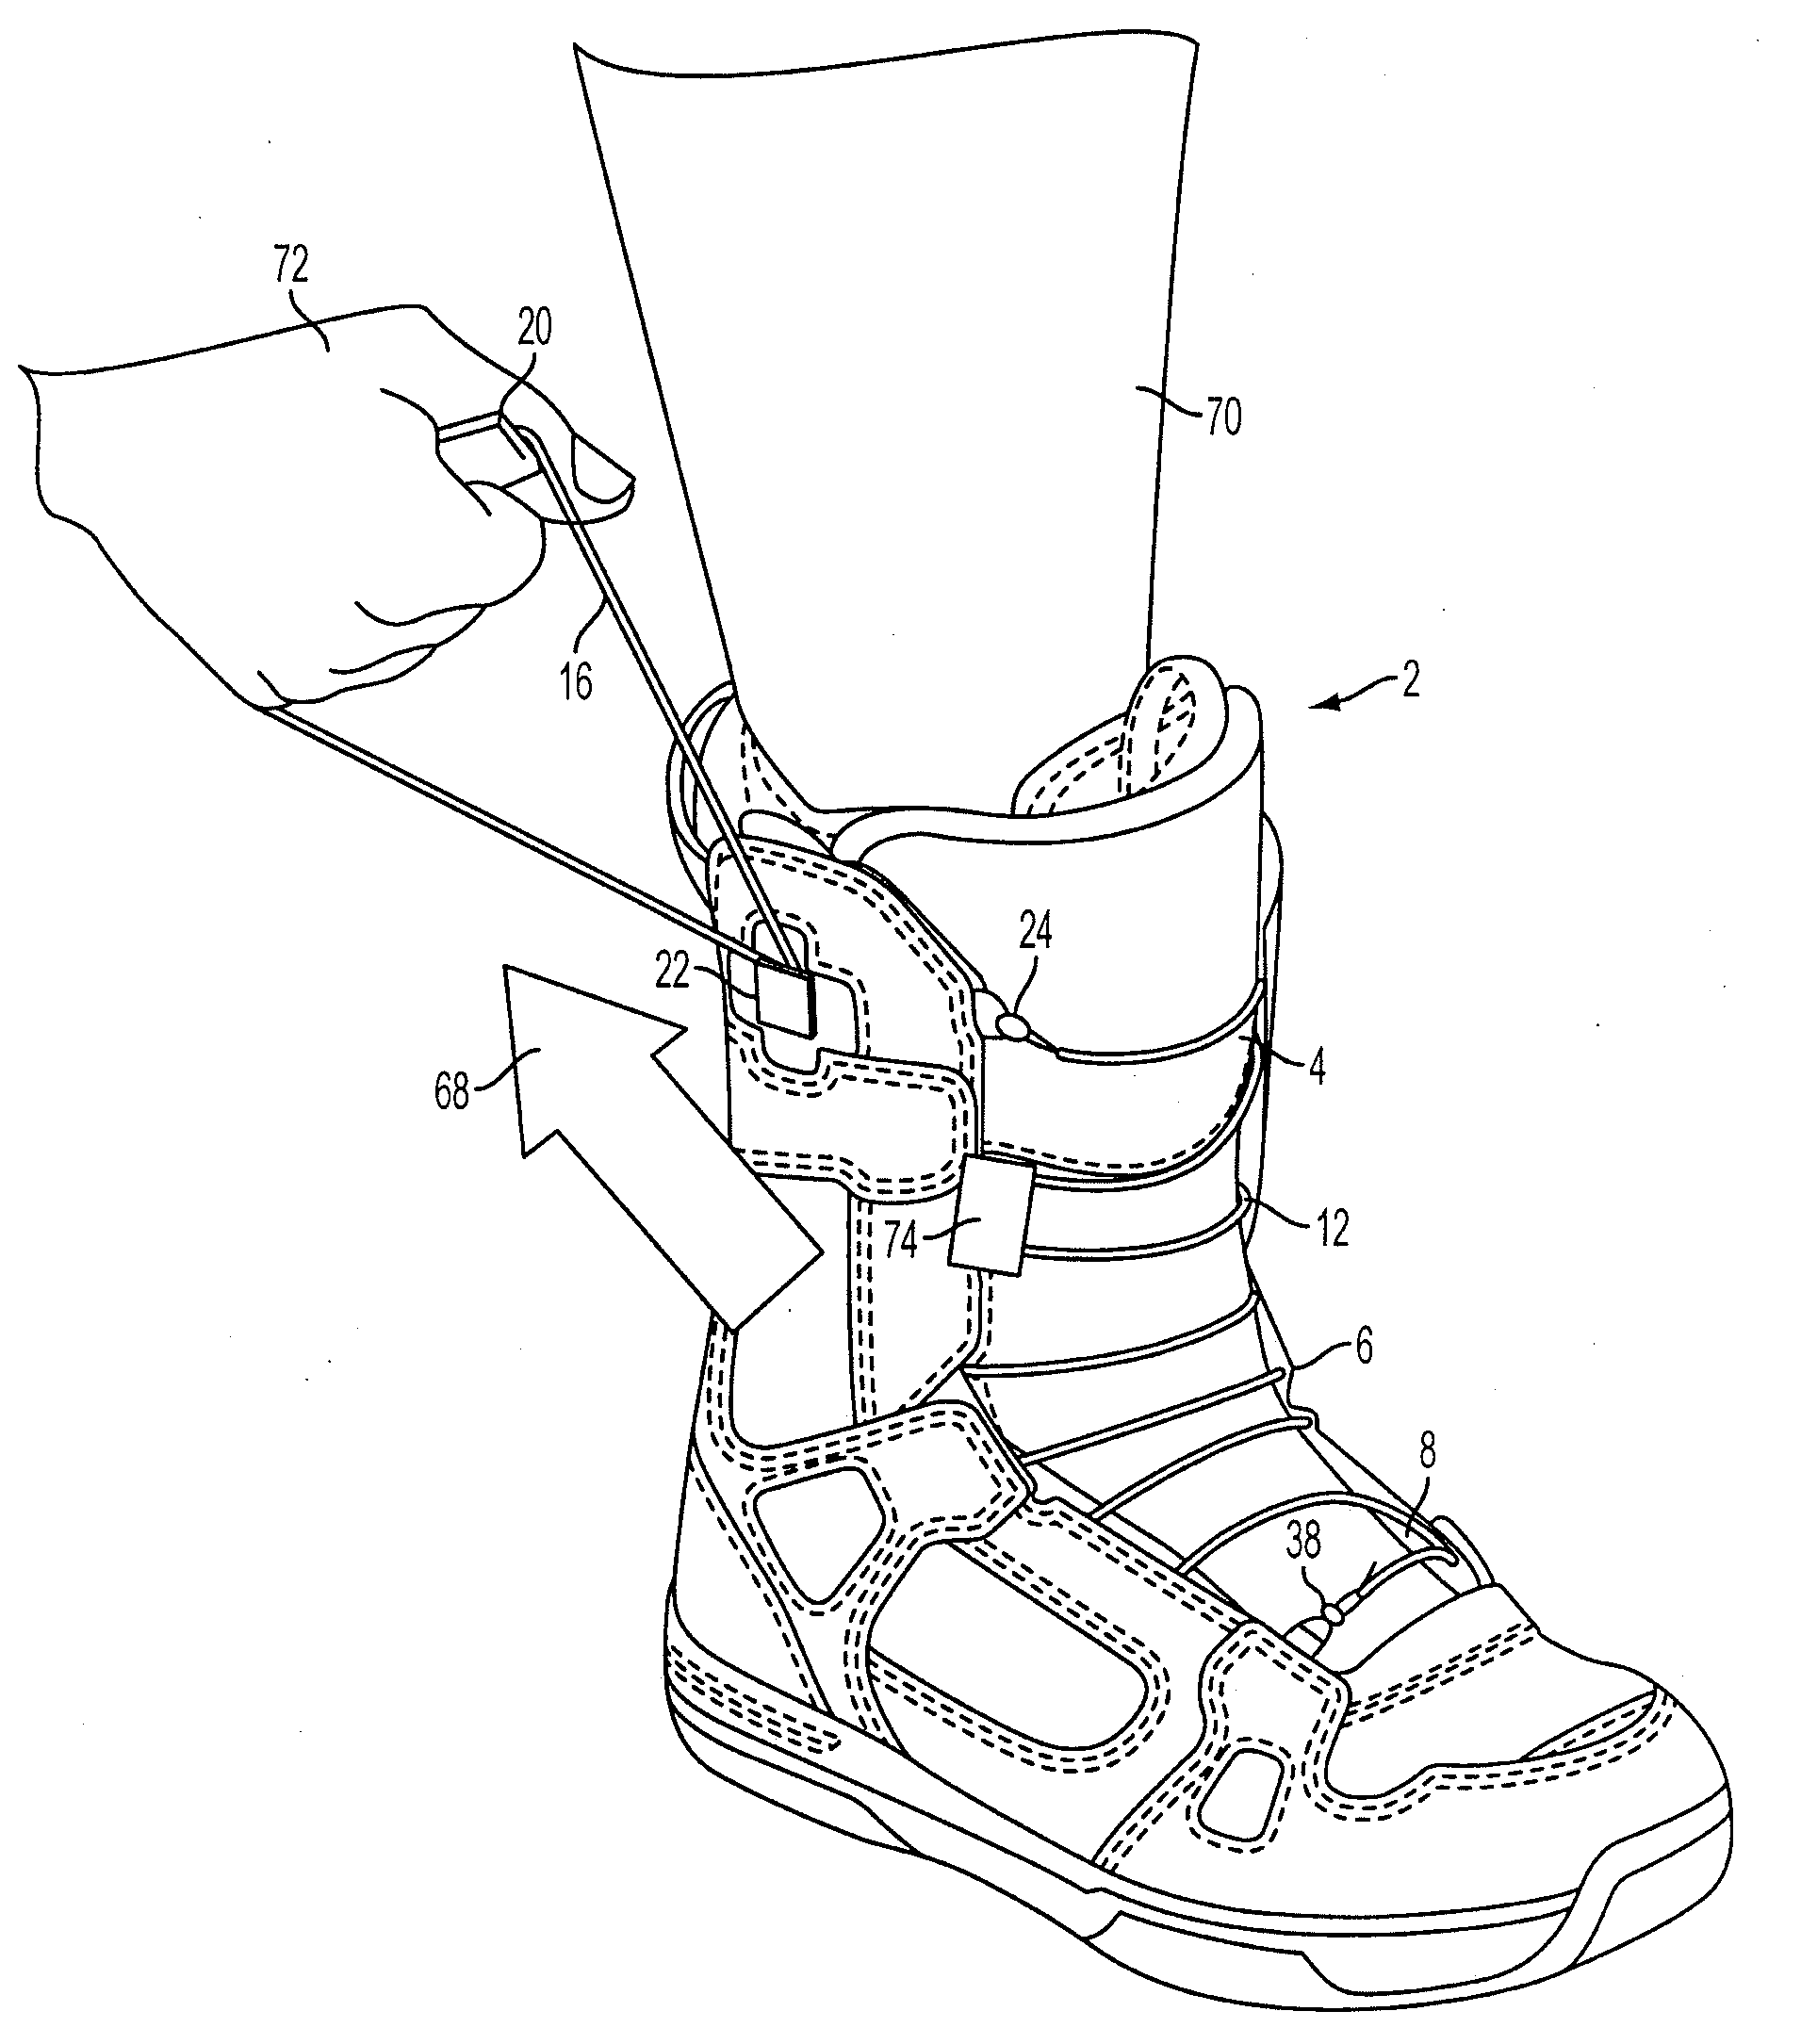 Single lace boot with multiple compression zones